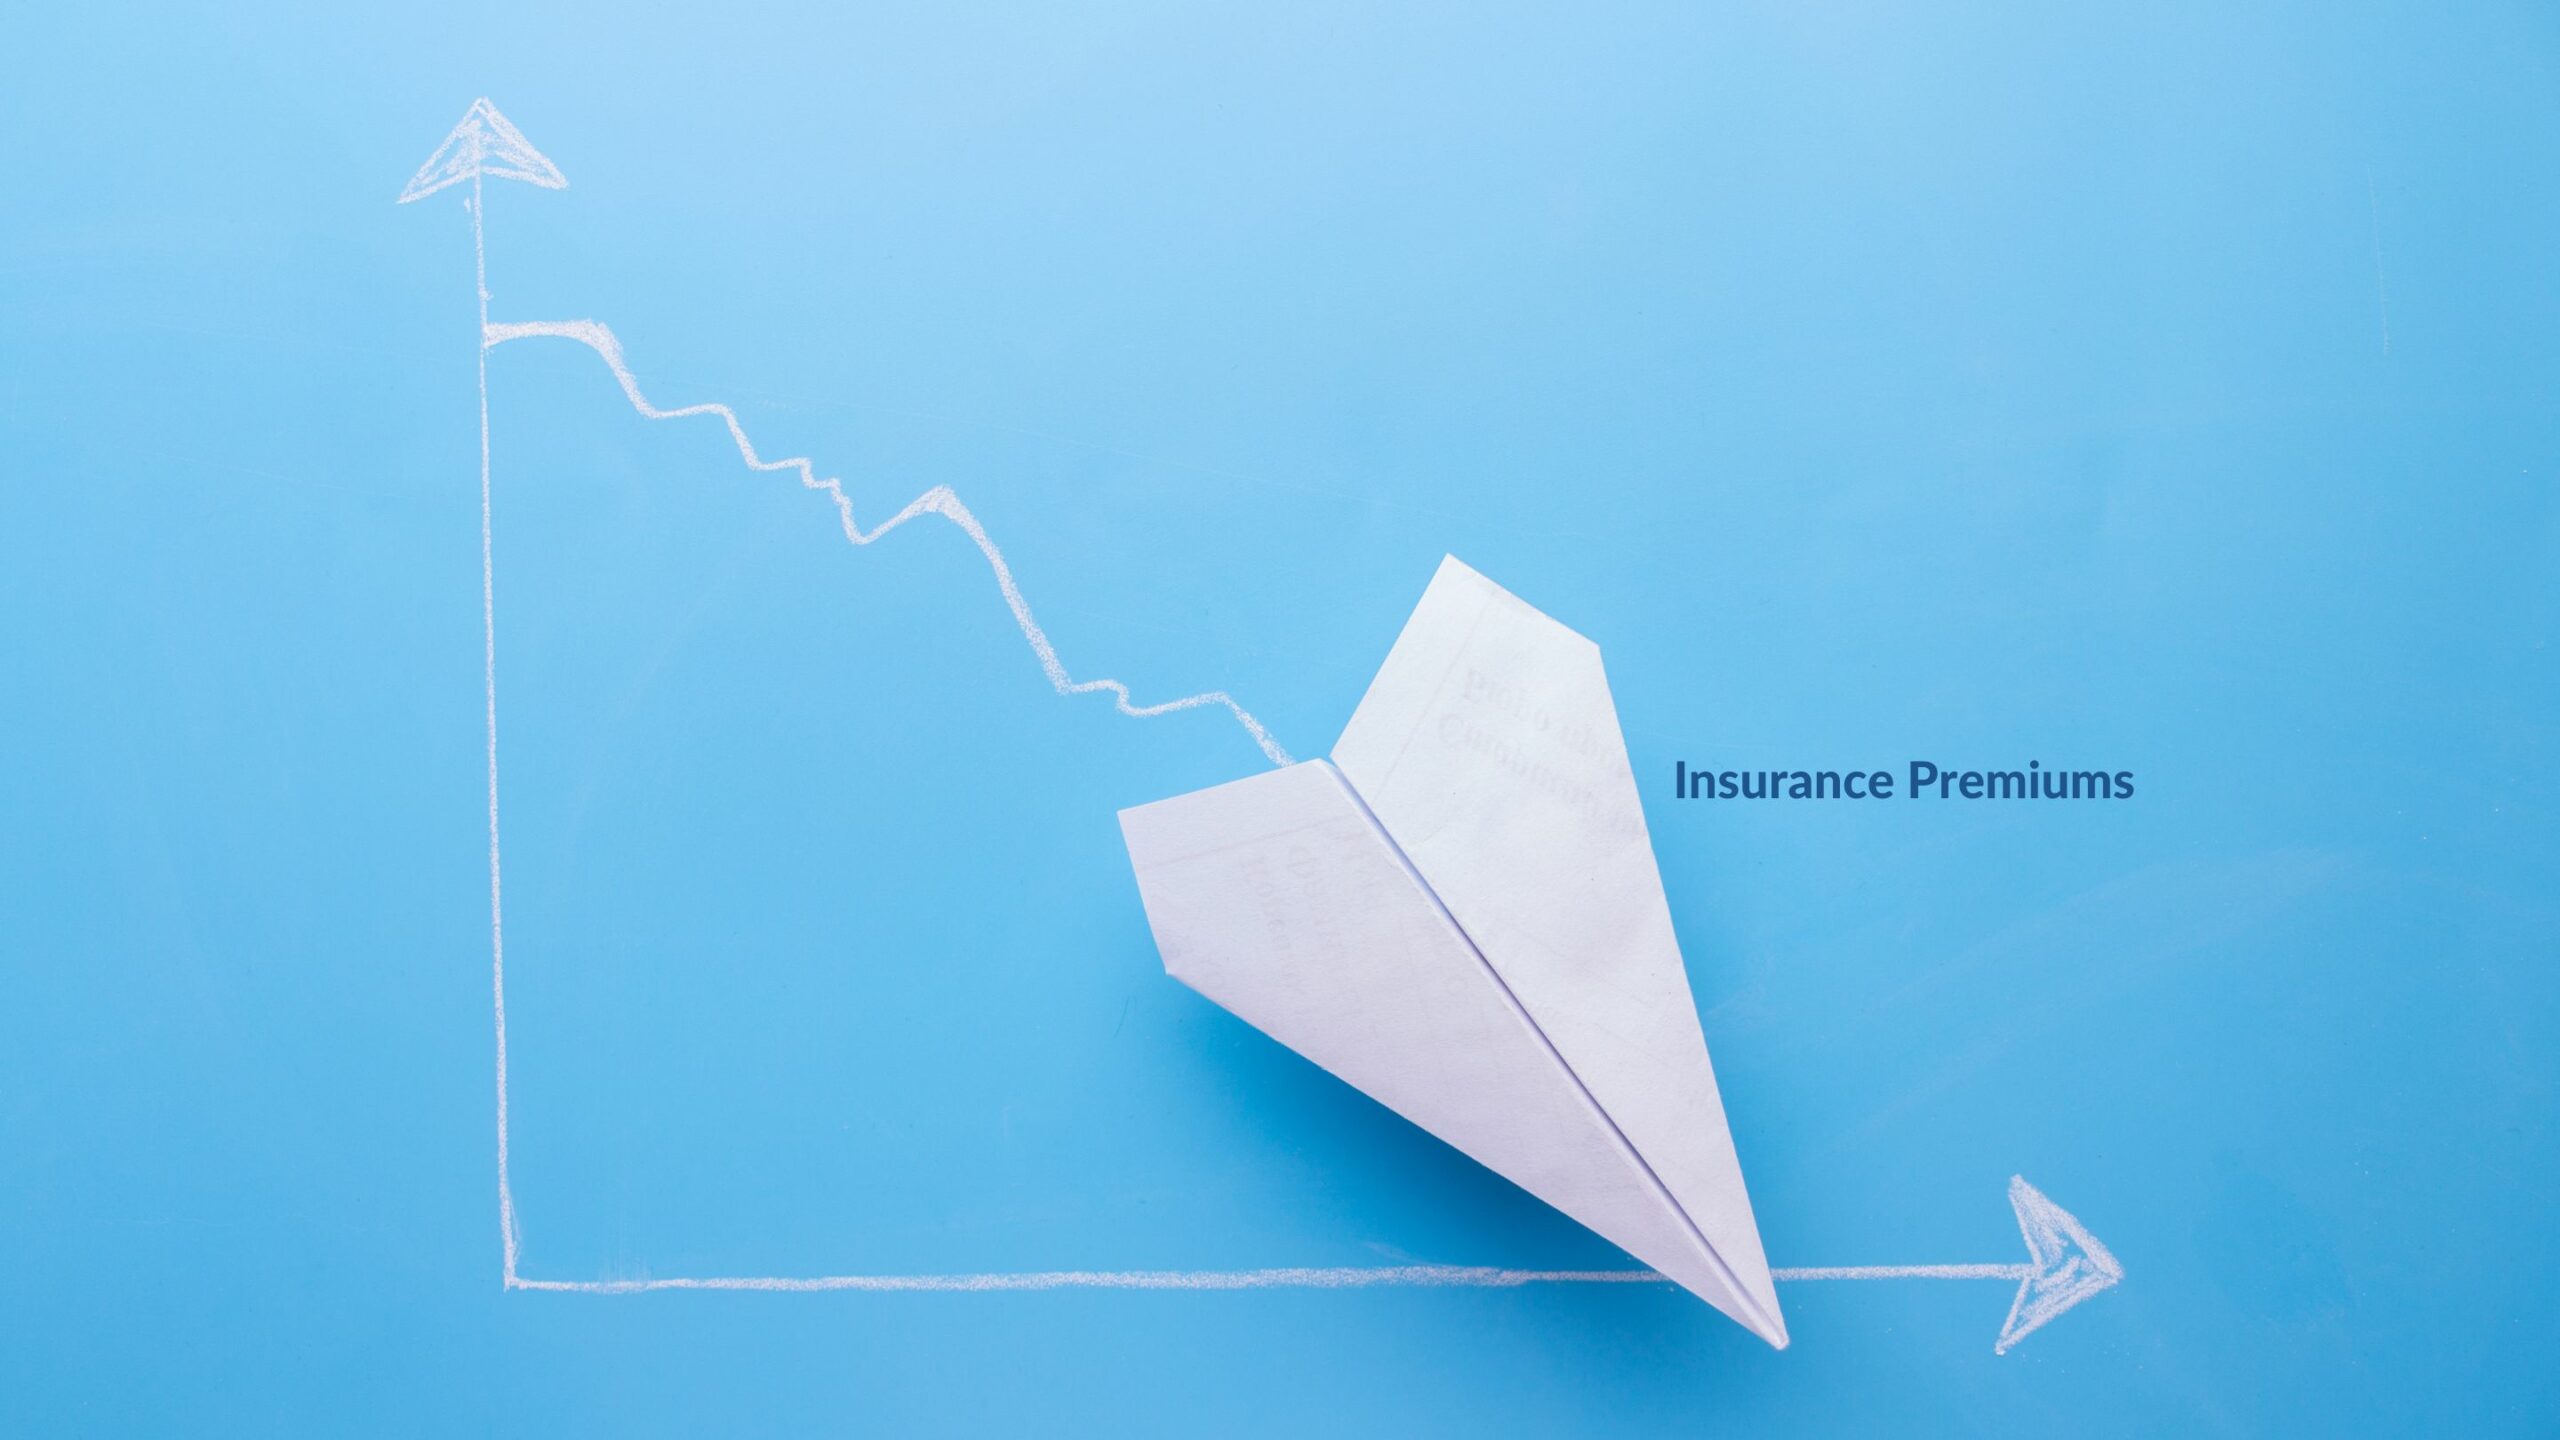 Reduced insurance premiums and other advantages for businesses